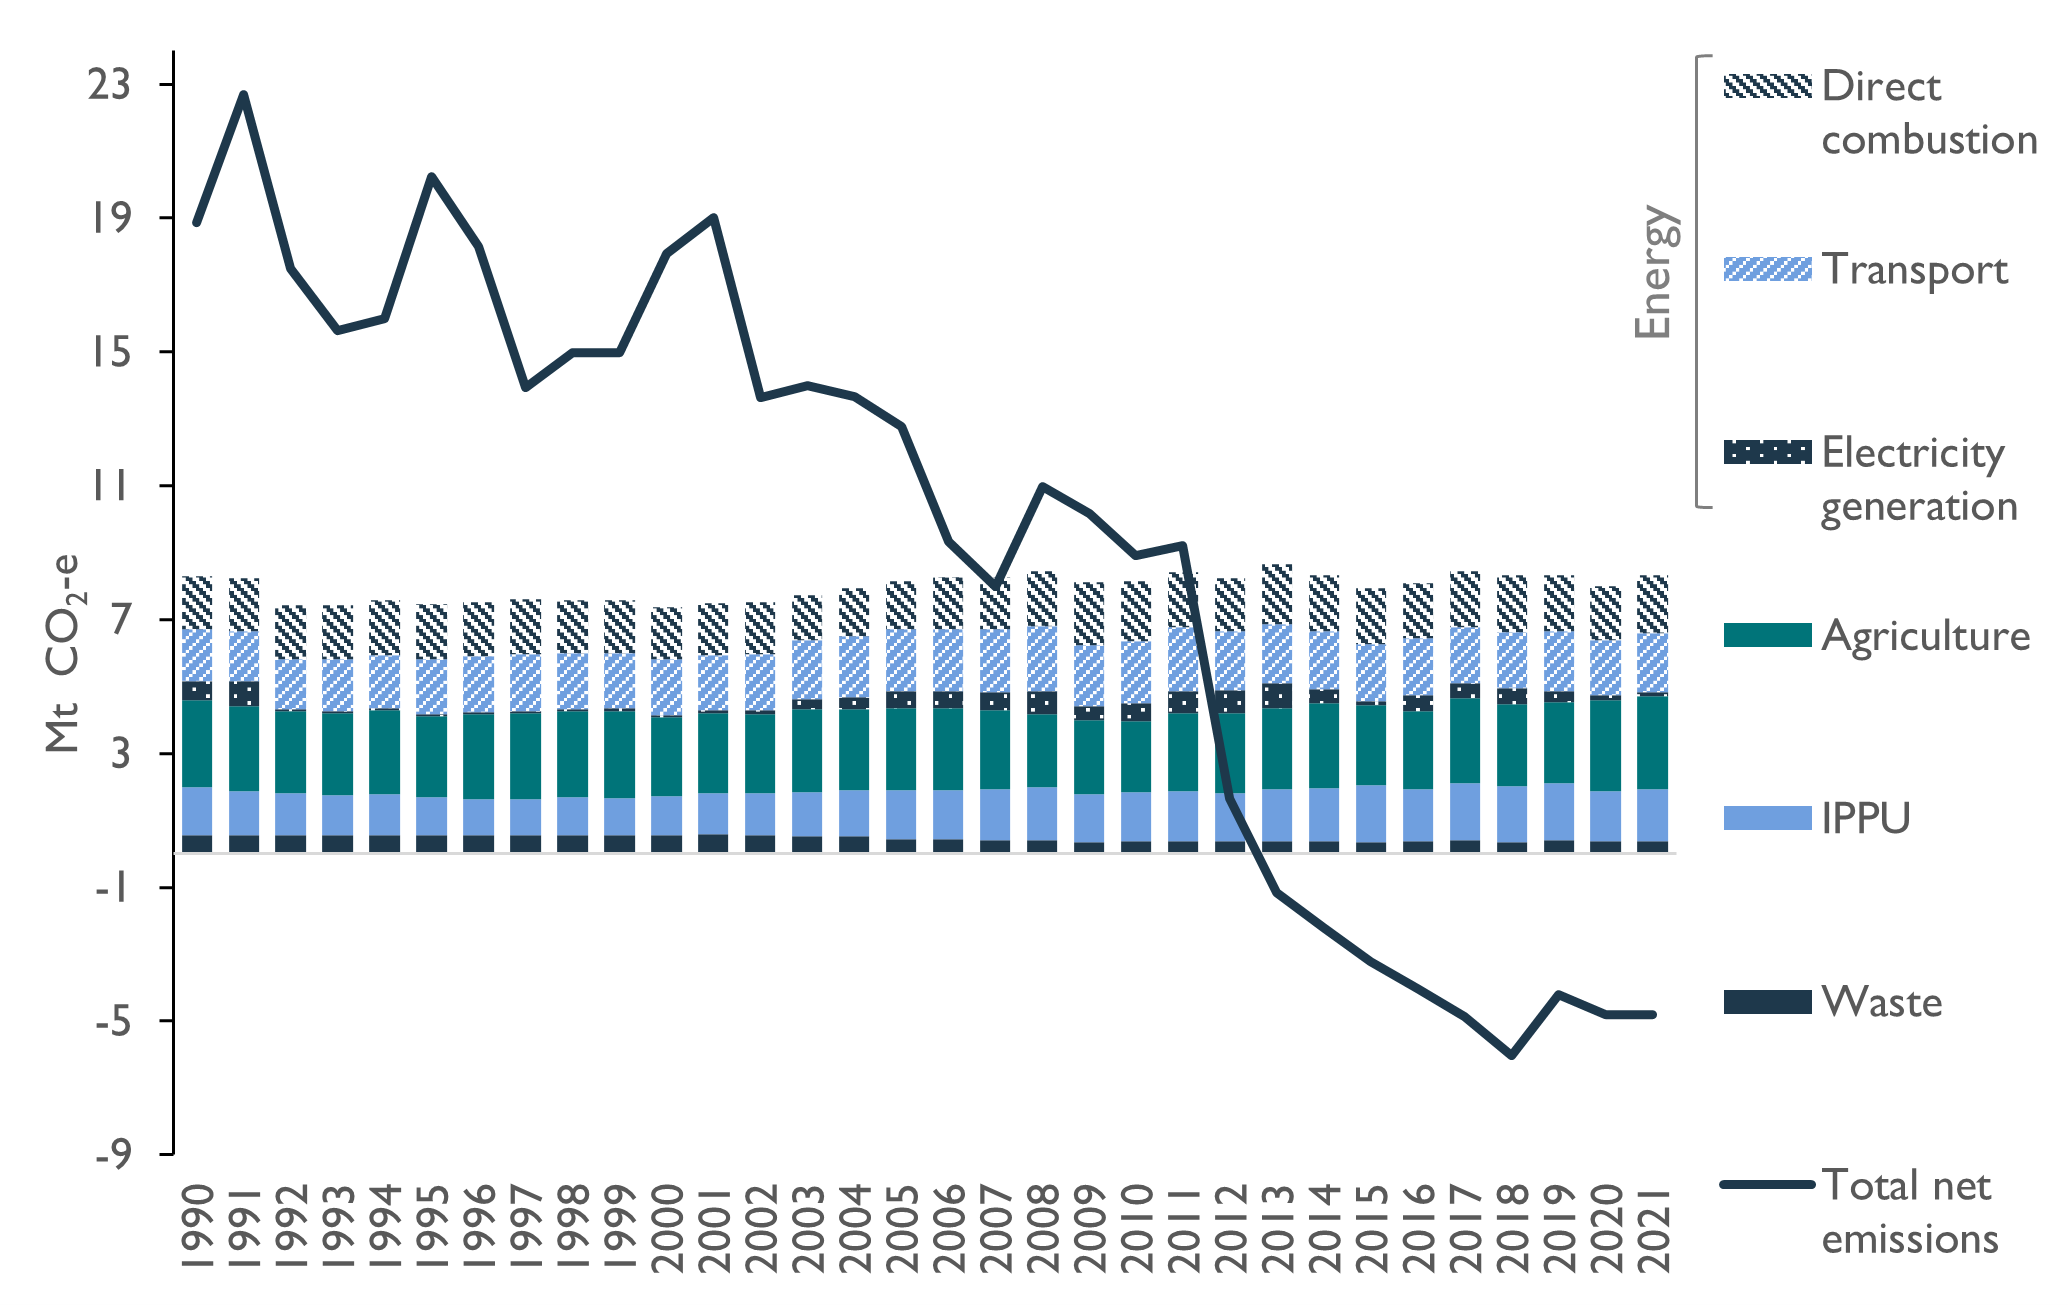 This figure combines a stacked bar chart, showing the change in sectoral and energy sub-sectoral annual greenhouse gas emissions, excluding the LULUCF sector, with a line graph showing total net emissions, from 1990 to 2021. Without emissions from the LULUCF sector, it is clearer to see that Tasmania's emissions from all other sectors have remained constant. It shows emissions from electricity generation fluctuating year by year, with a minor trend of increasing emissions in industrial processes and product use (IPPU), direct combustion, agriculture and transport, while emissions from waste have decreased.